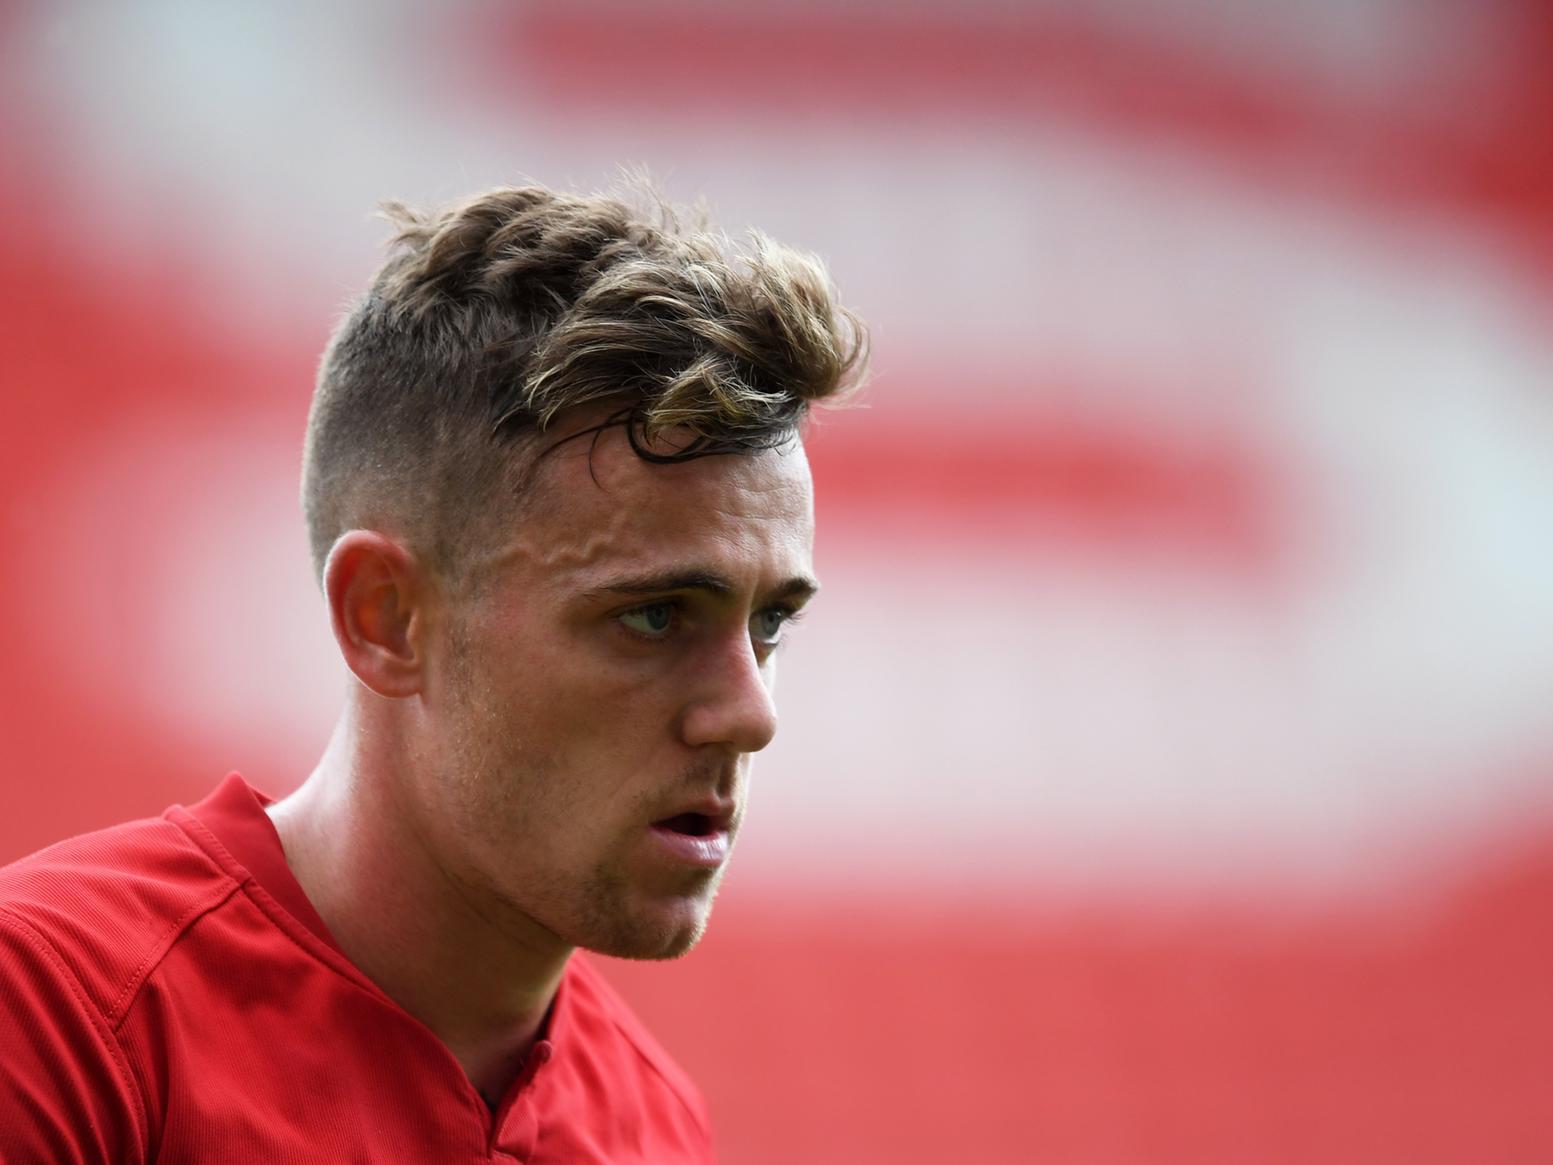 Hull City and Huddersfield Town are said to be ready to go head-to-head to sign Bristol City'sSammie Szmodics on a loan deal next month, with the Robins likely to sanction a temporary deal for the 24-year-old. (Bristol Post)